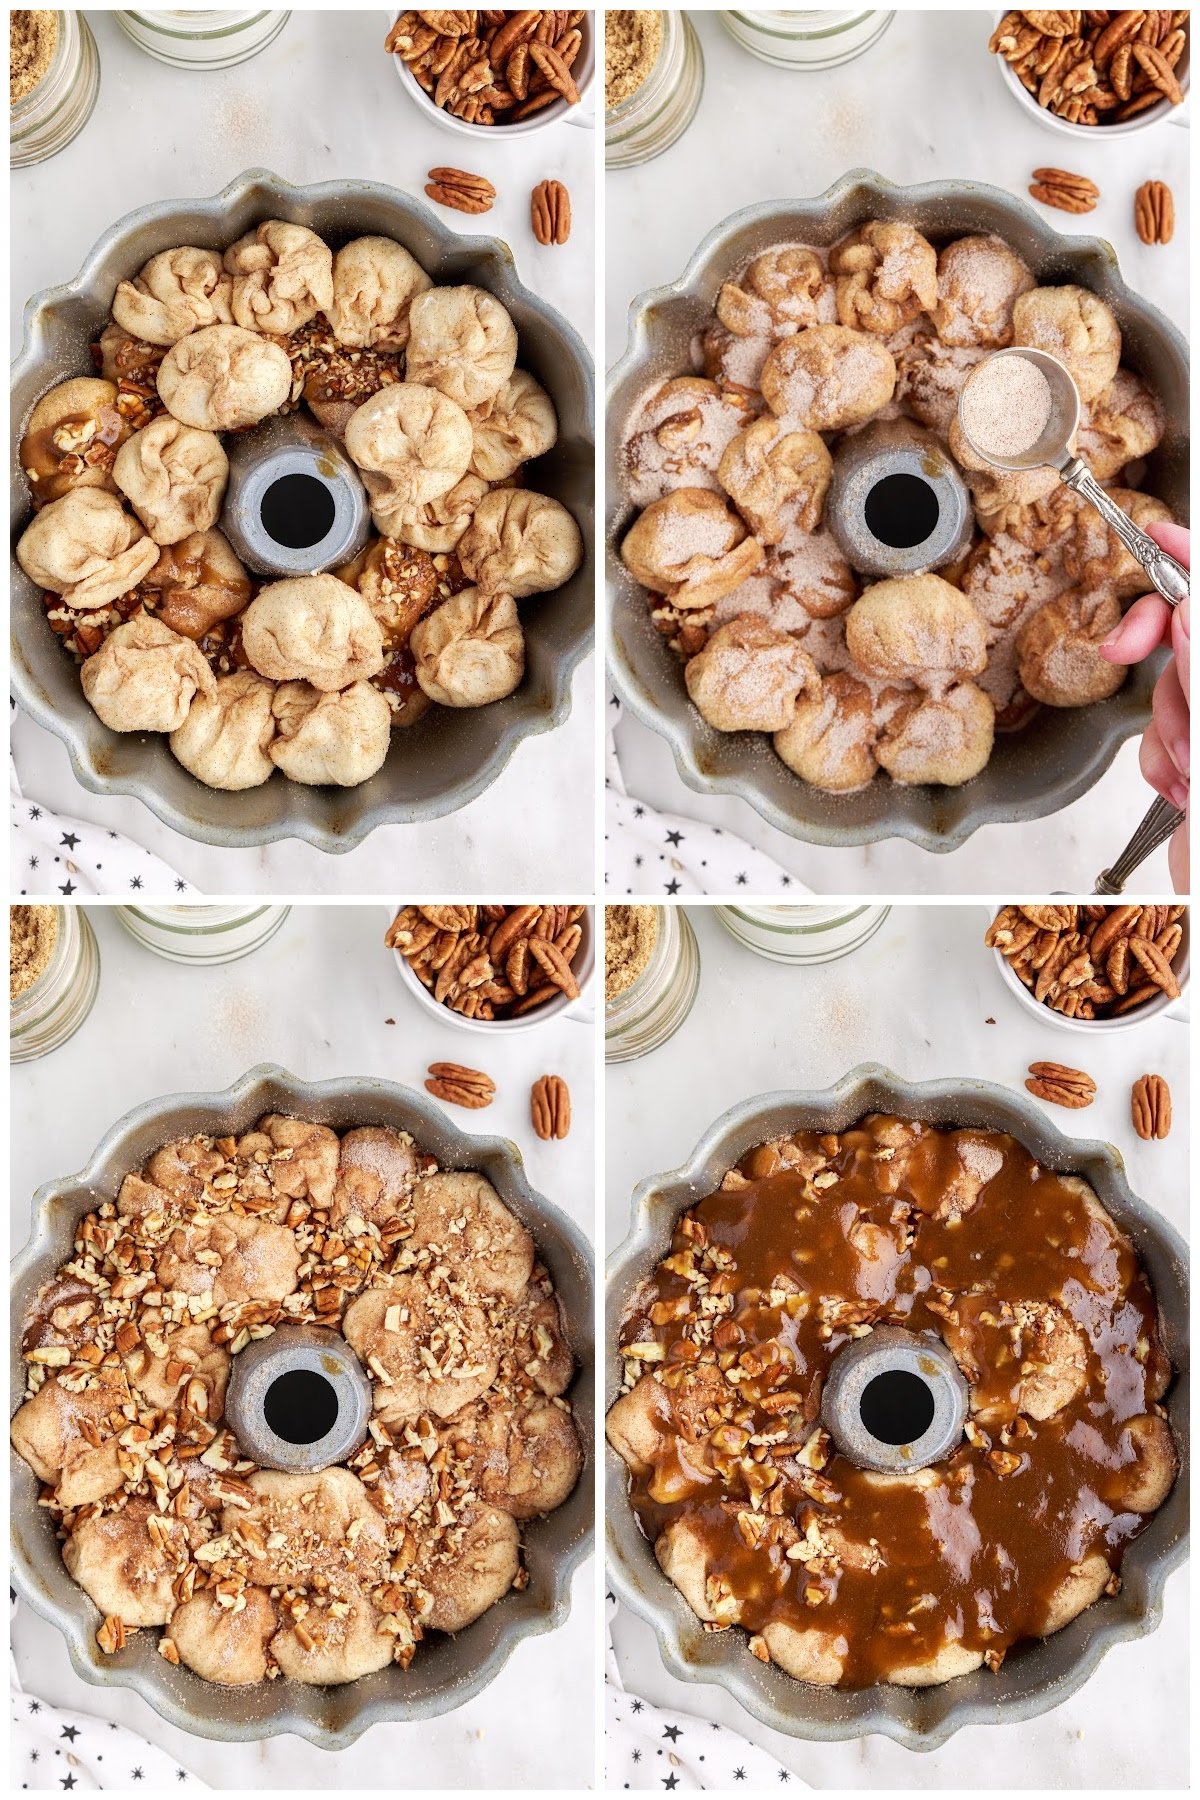 Four steps shown here including the layering of the stuffed biscuits and sugar into the bundt pan.